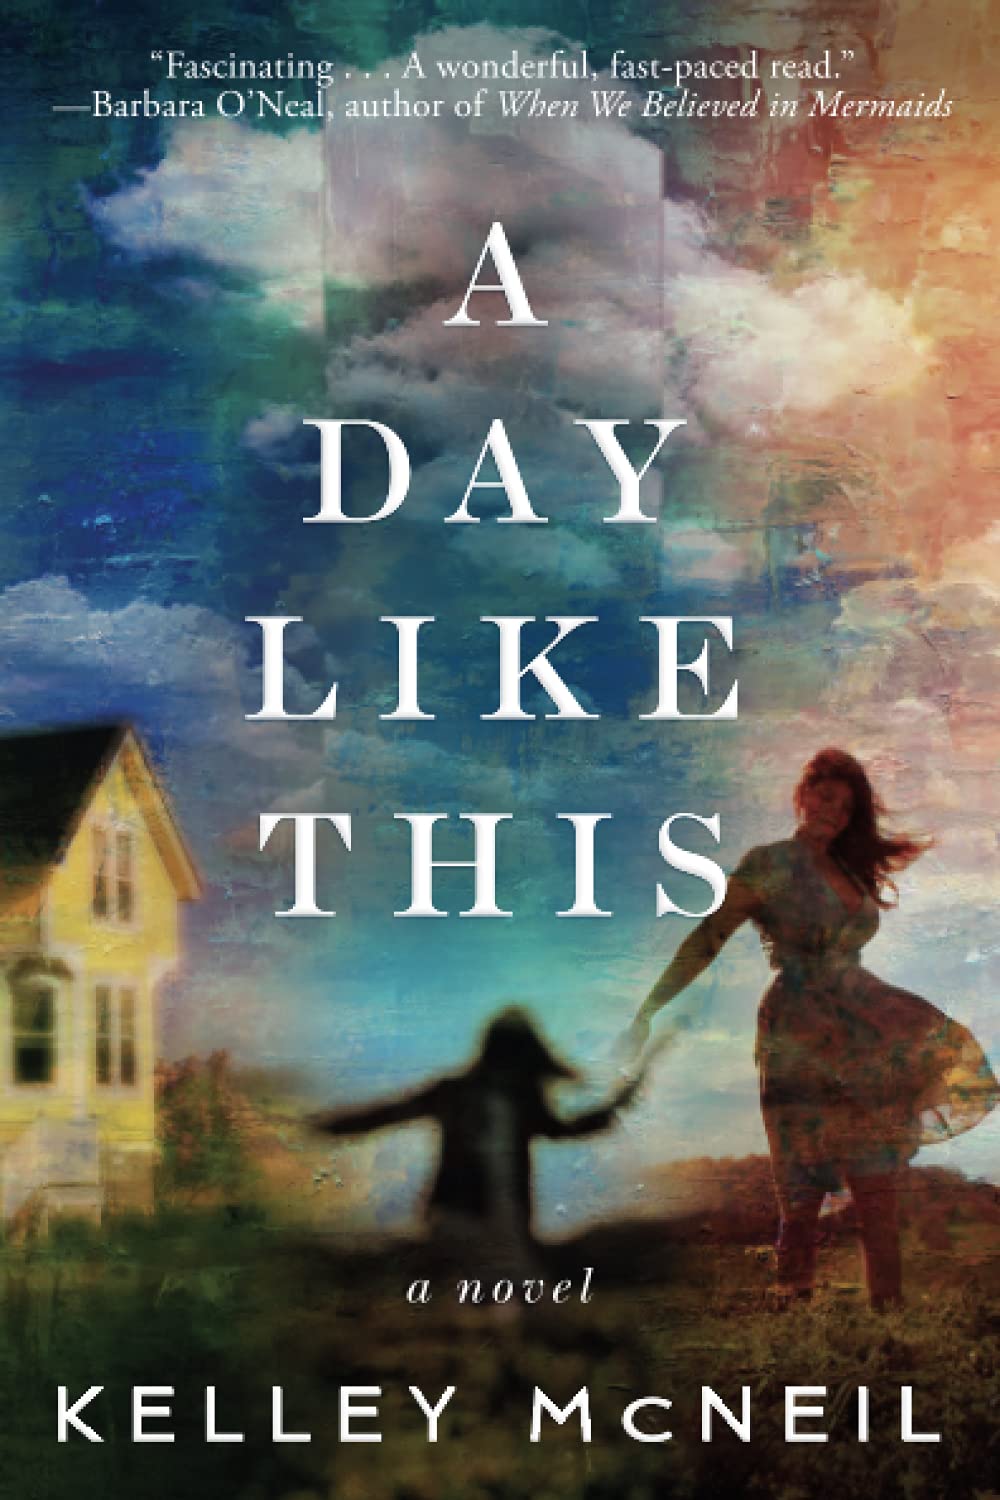 A Day Like This [Kelley McNeil]